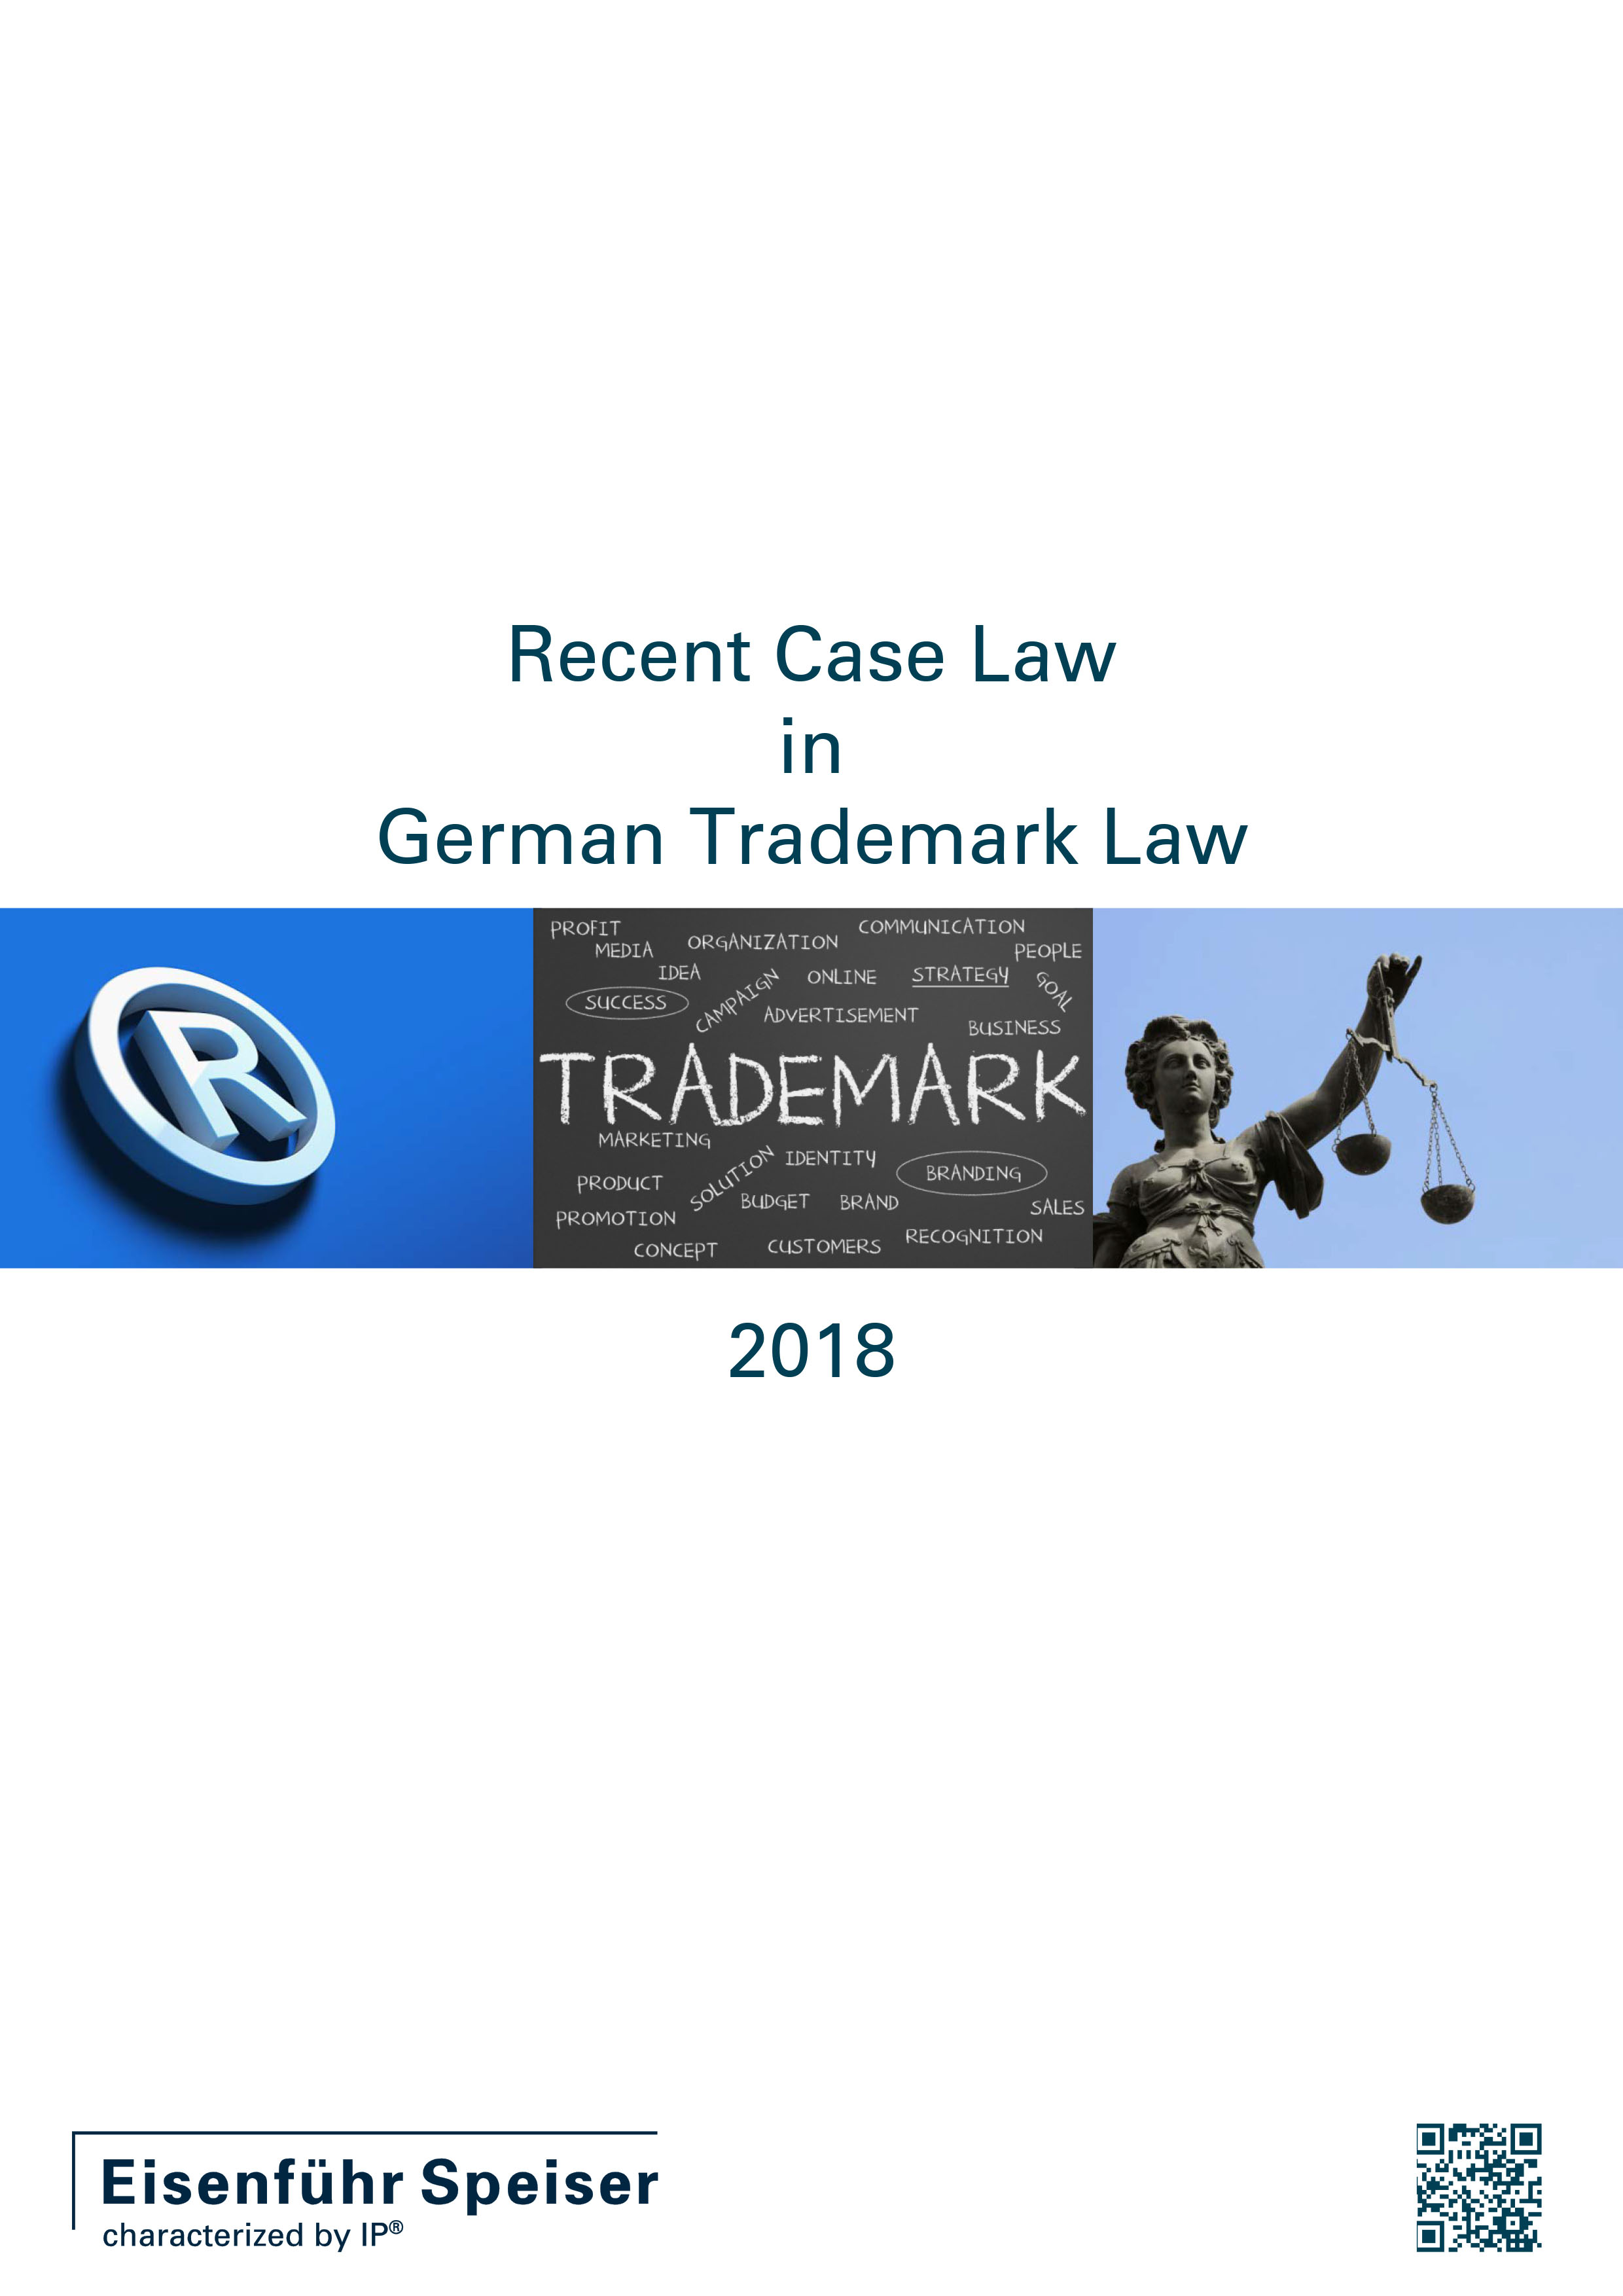 Recent Case Law in German Trademark Law 2018